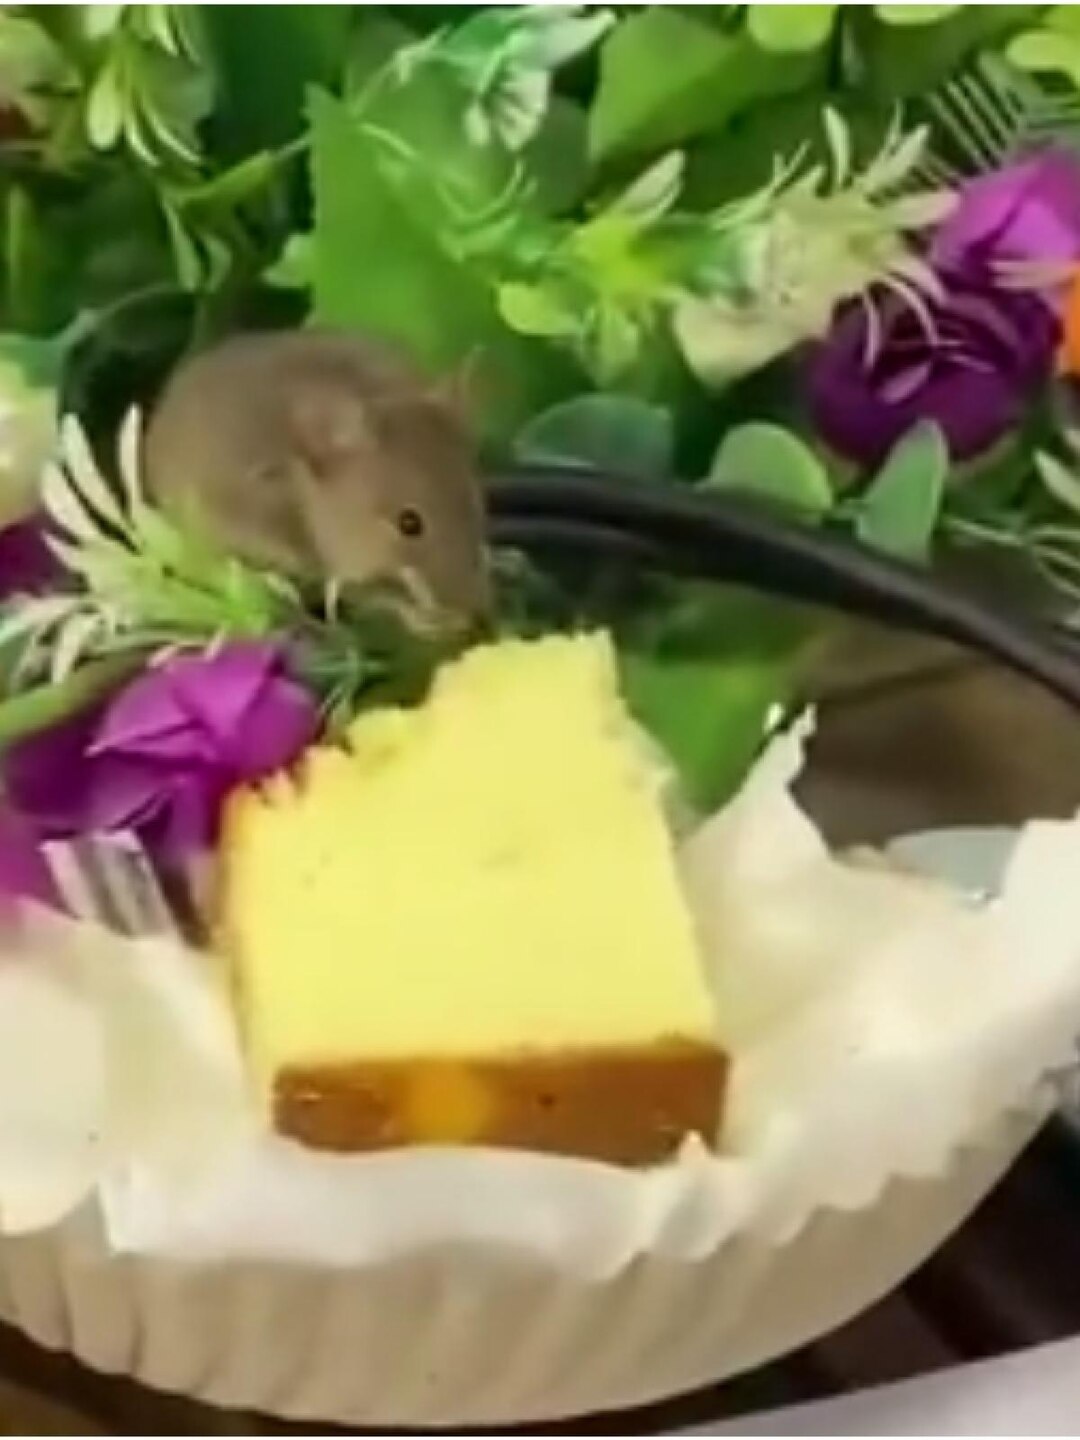 Caught on Camera: Crafty rat eating cake on table while officials are busy in discussion